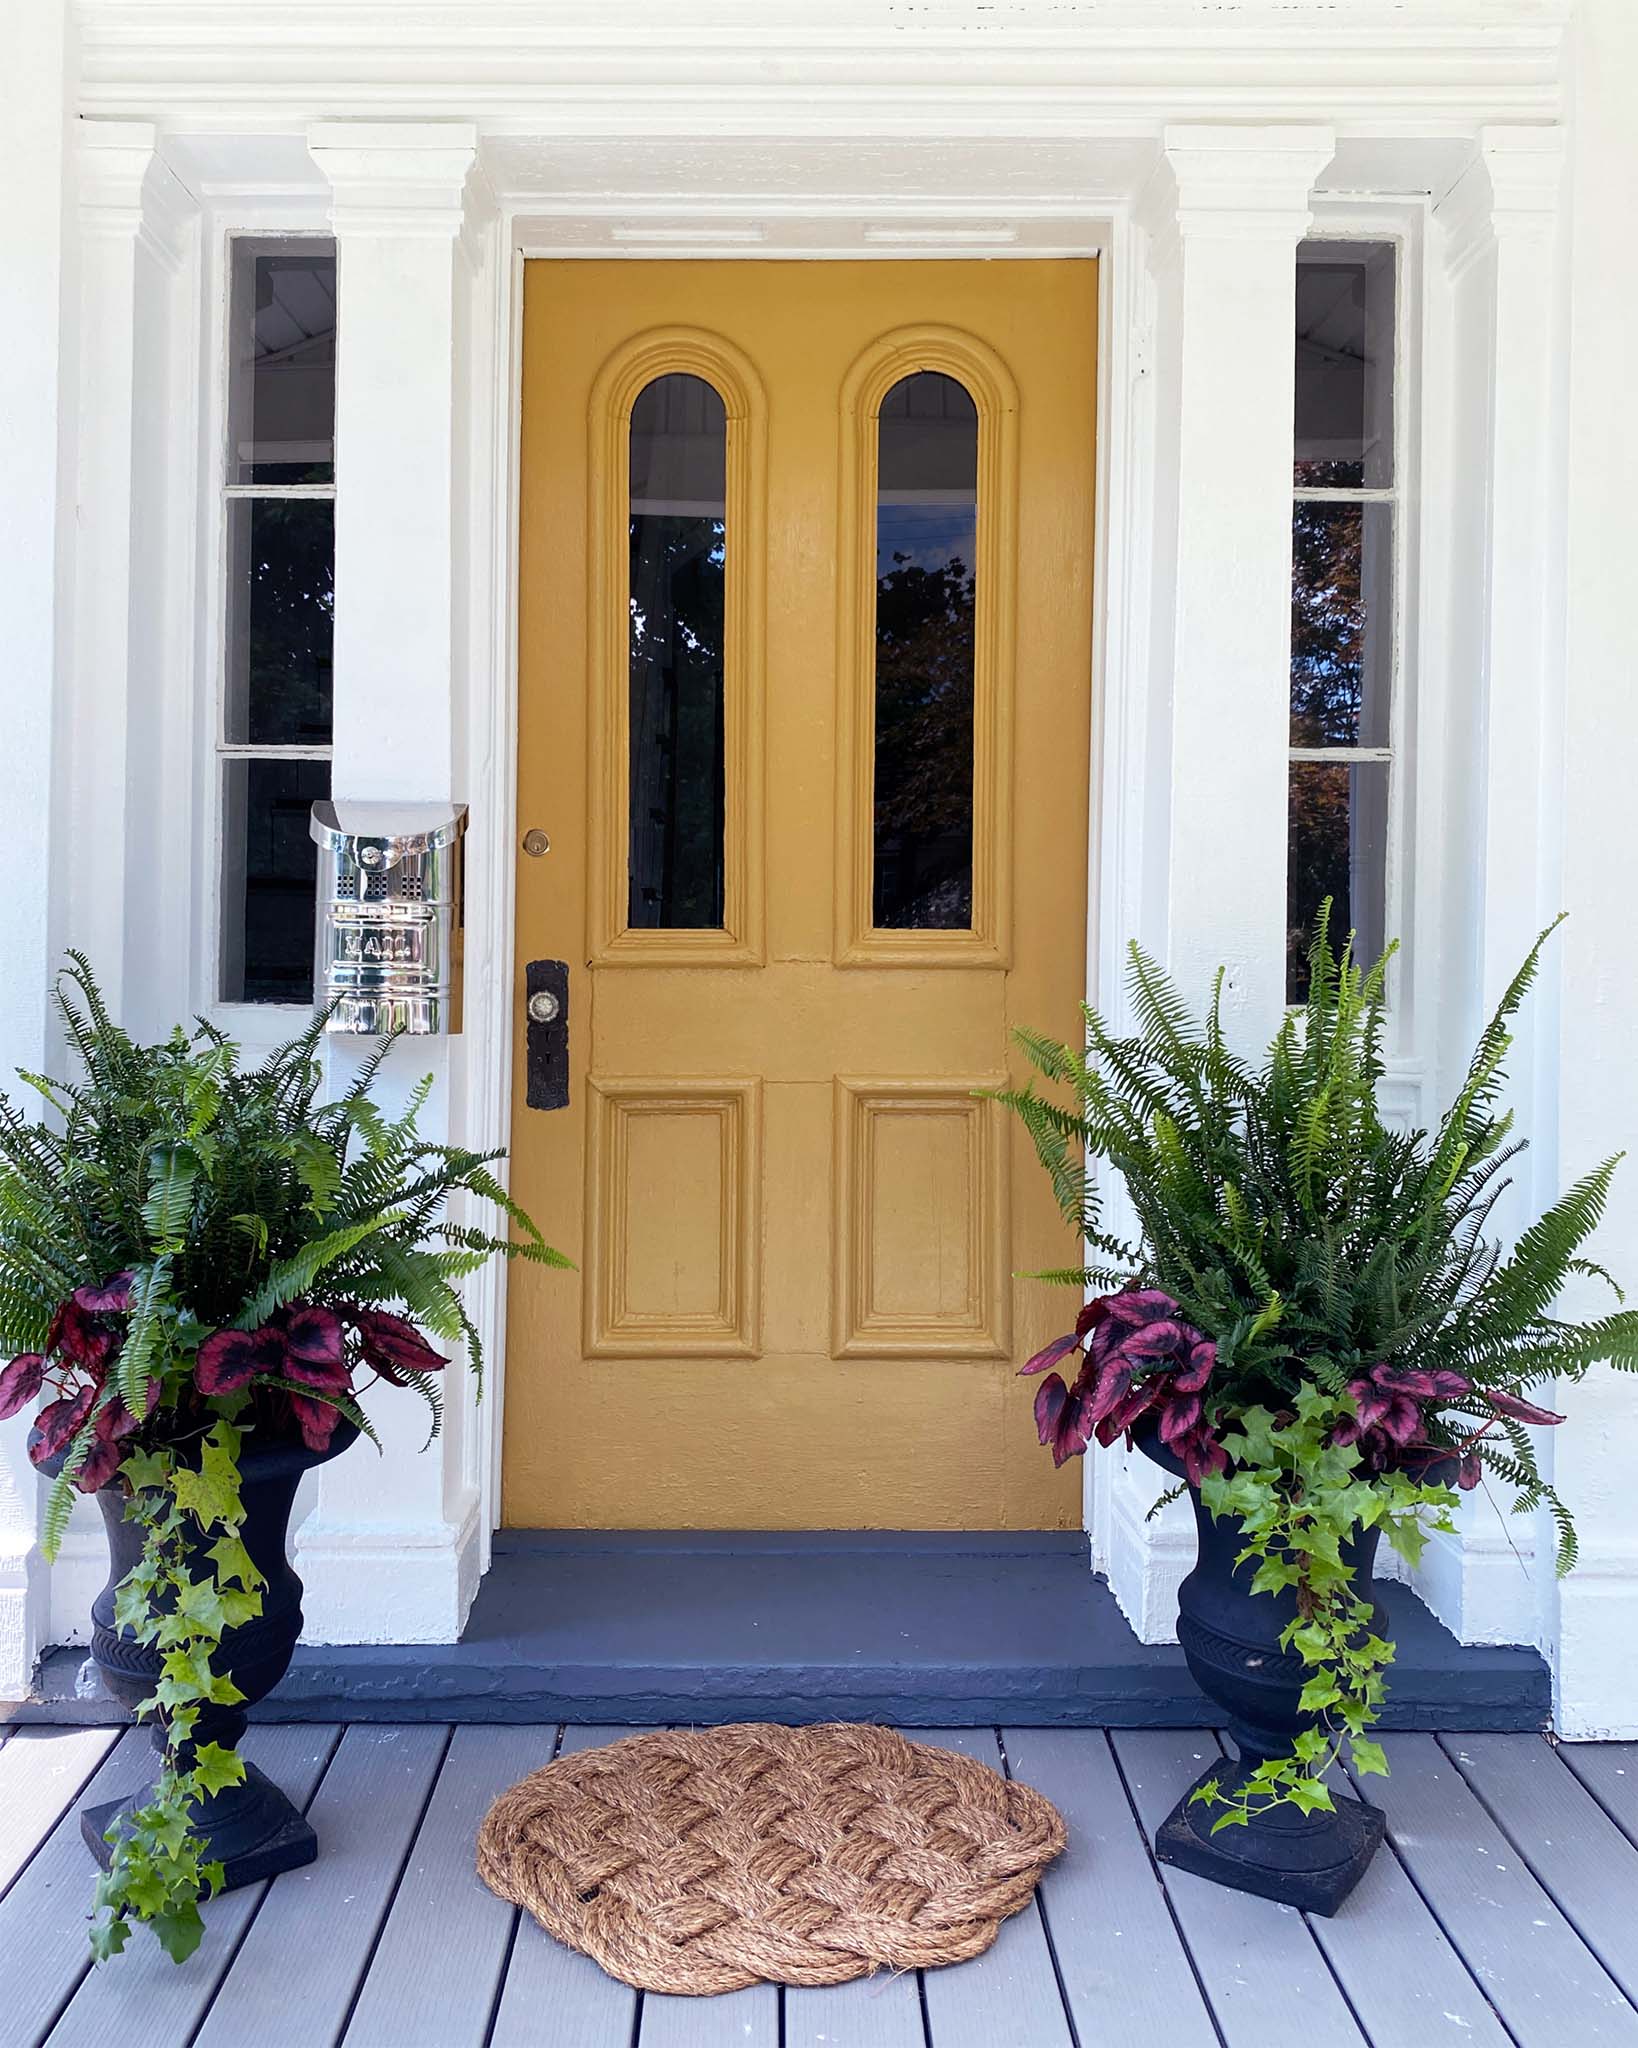 How to Paint a Front Door: Before and After. Reinstalling the door back on its hinges. A yellow painted front door and a charming front porch.  